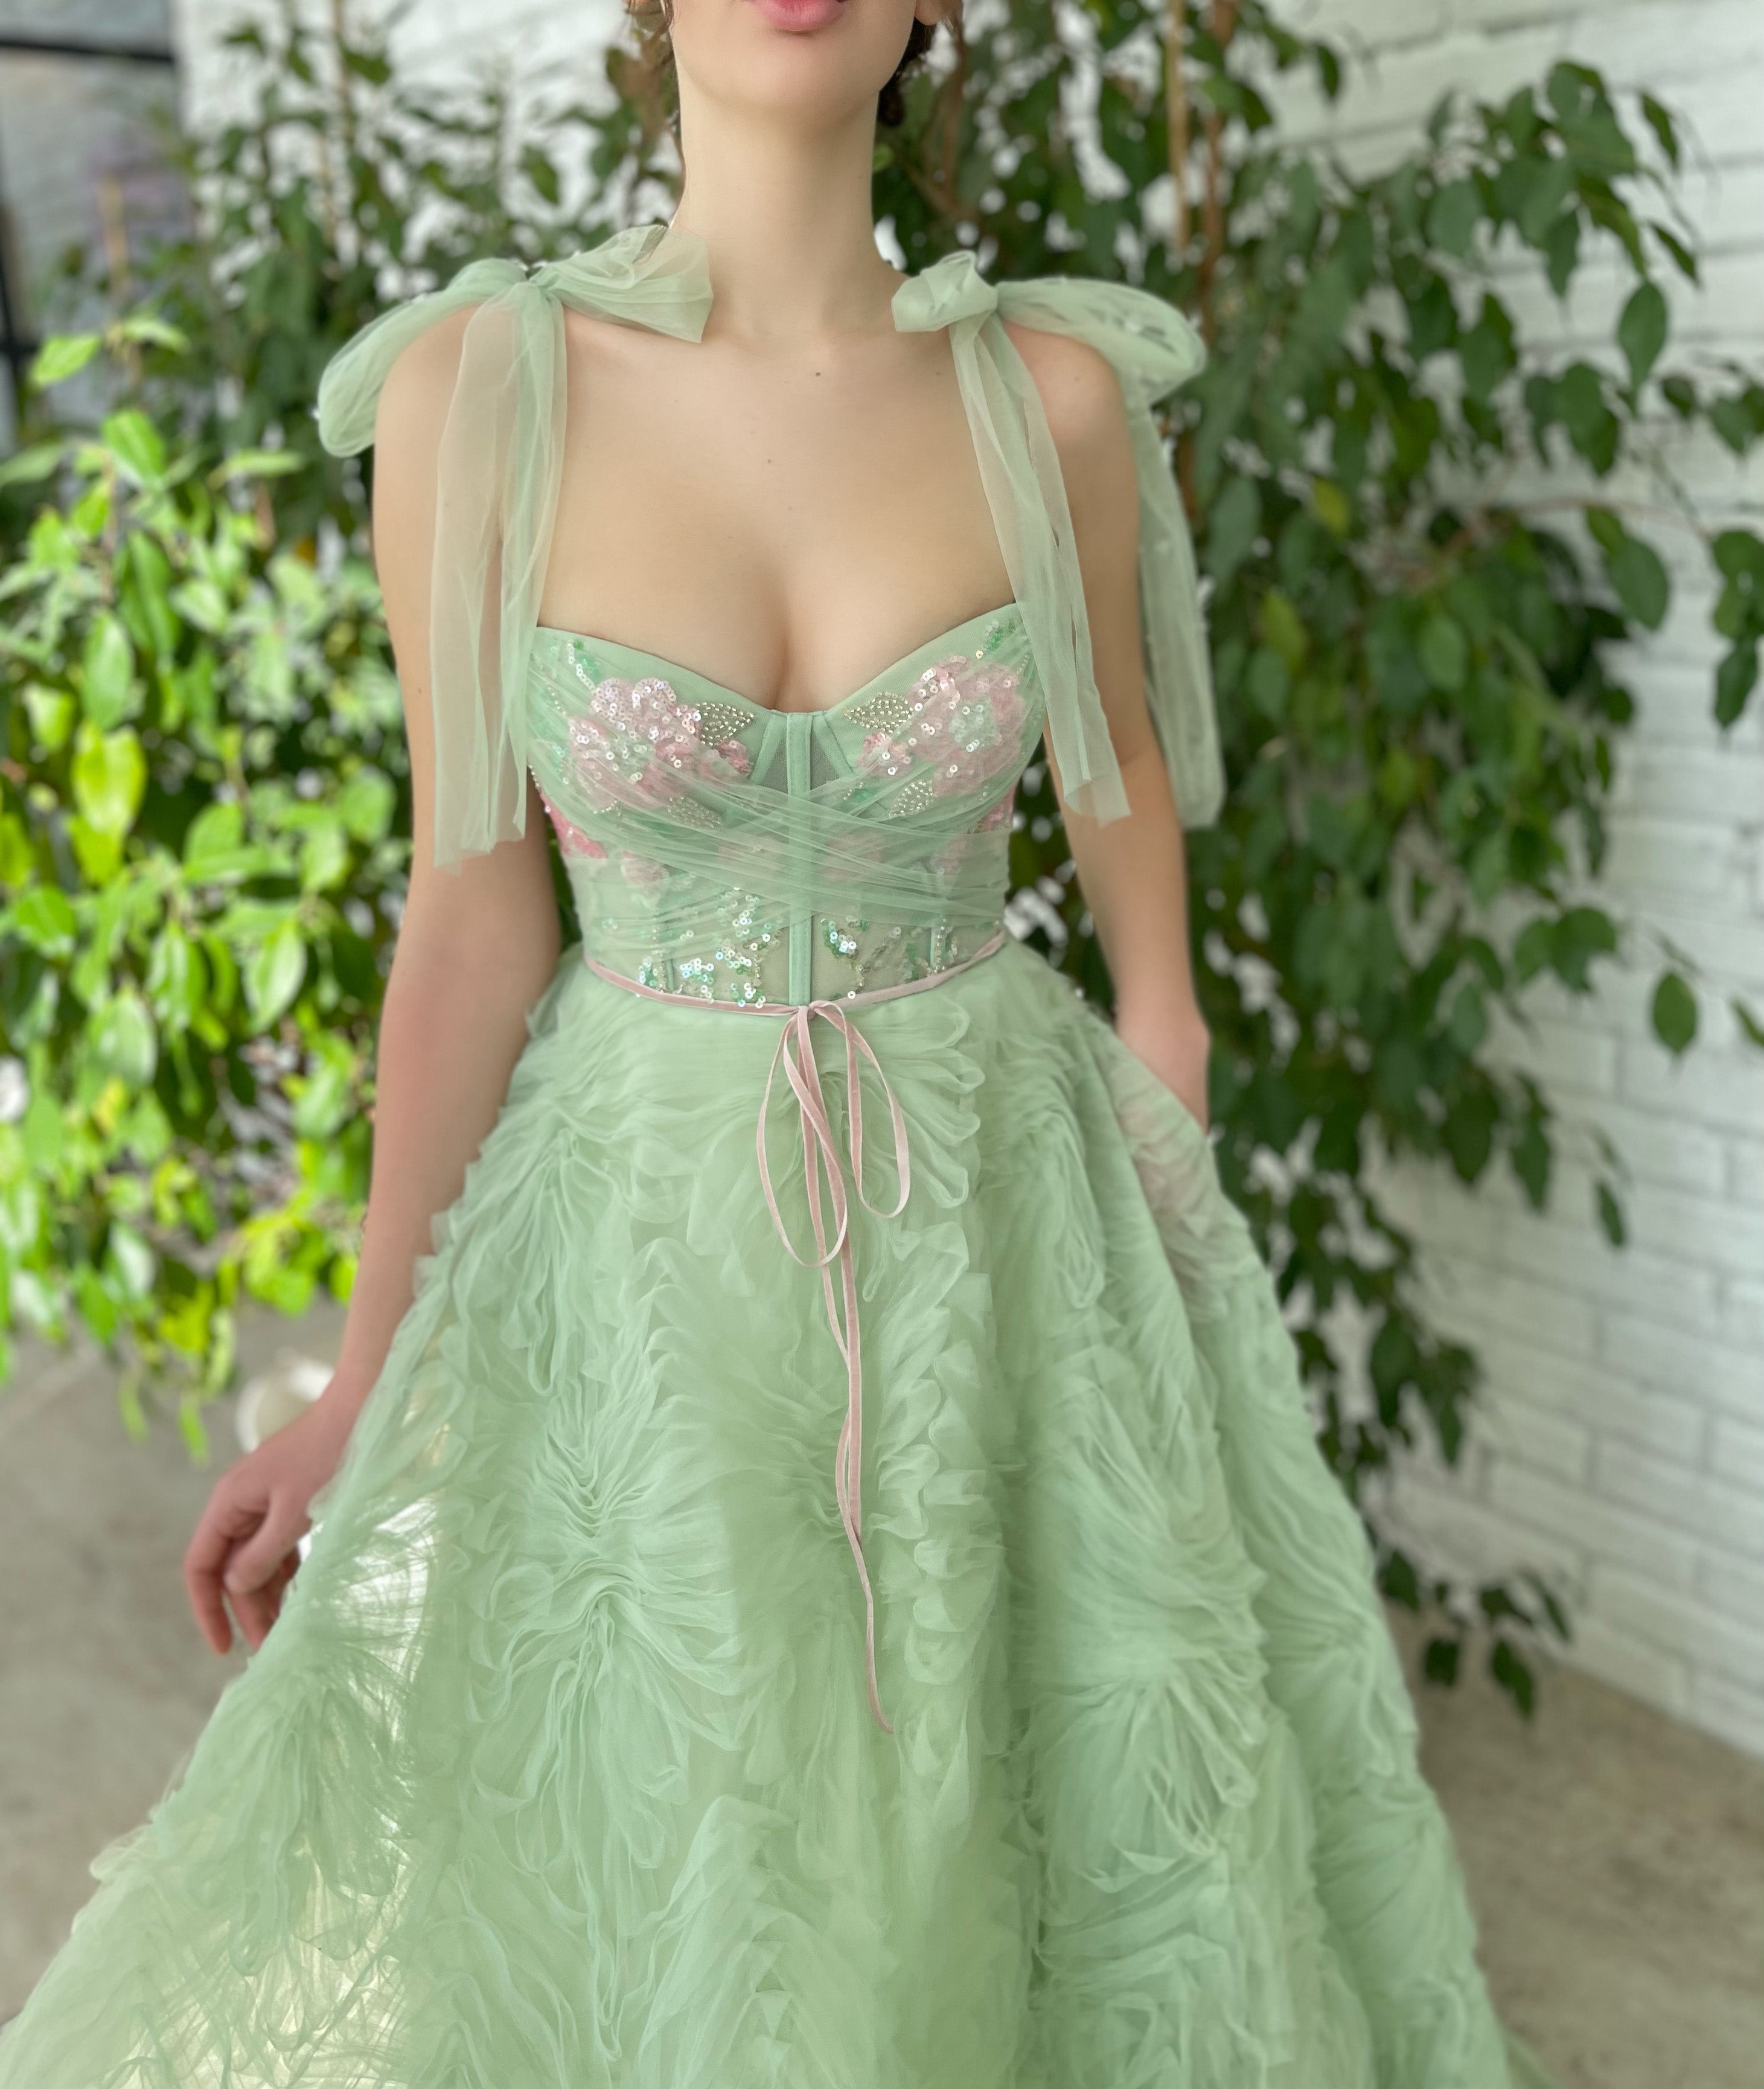 Green A-Line dress with bow straps and embroidery